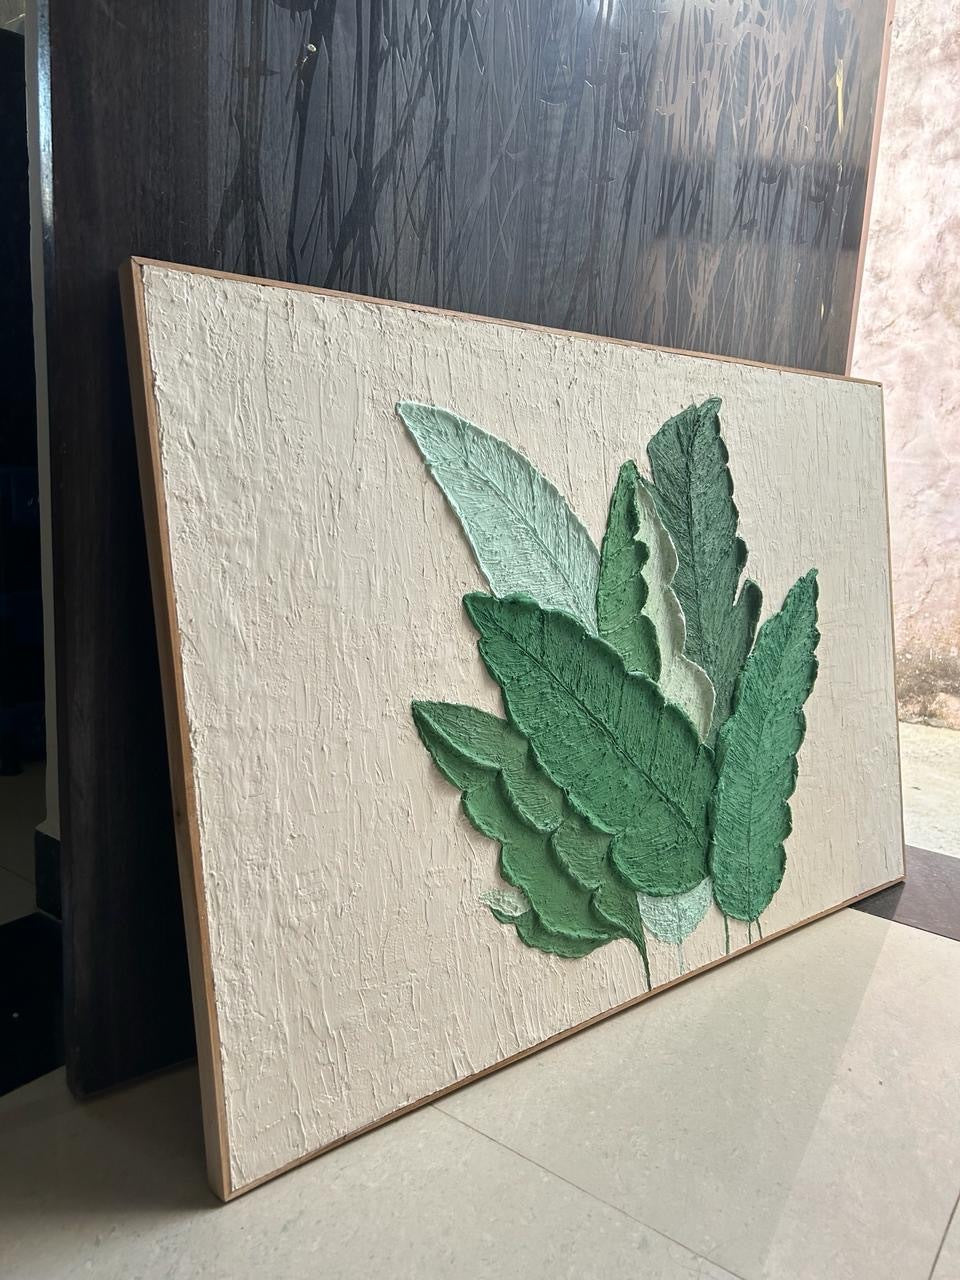 Leaf Texture Art (24*36 Inches)